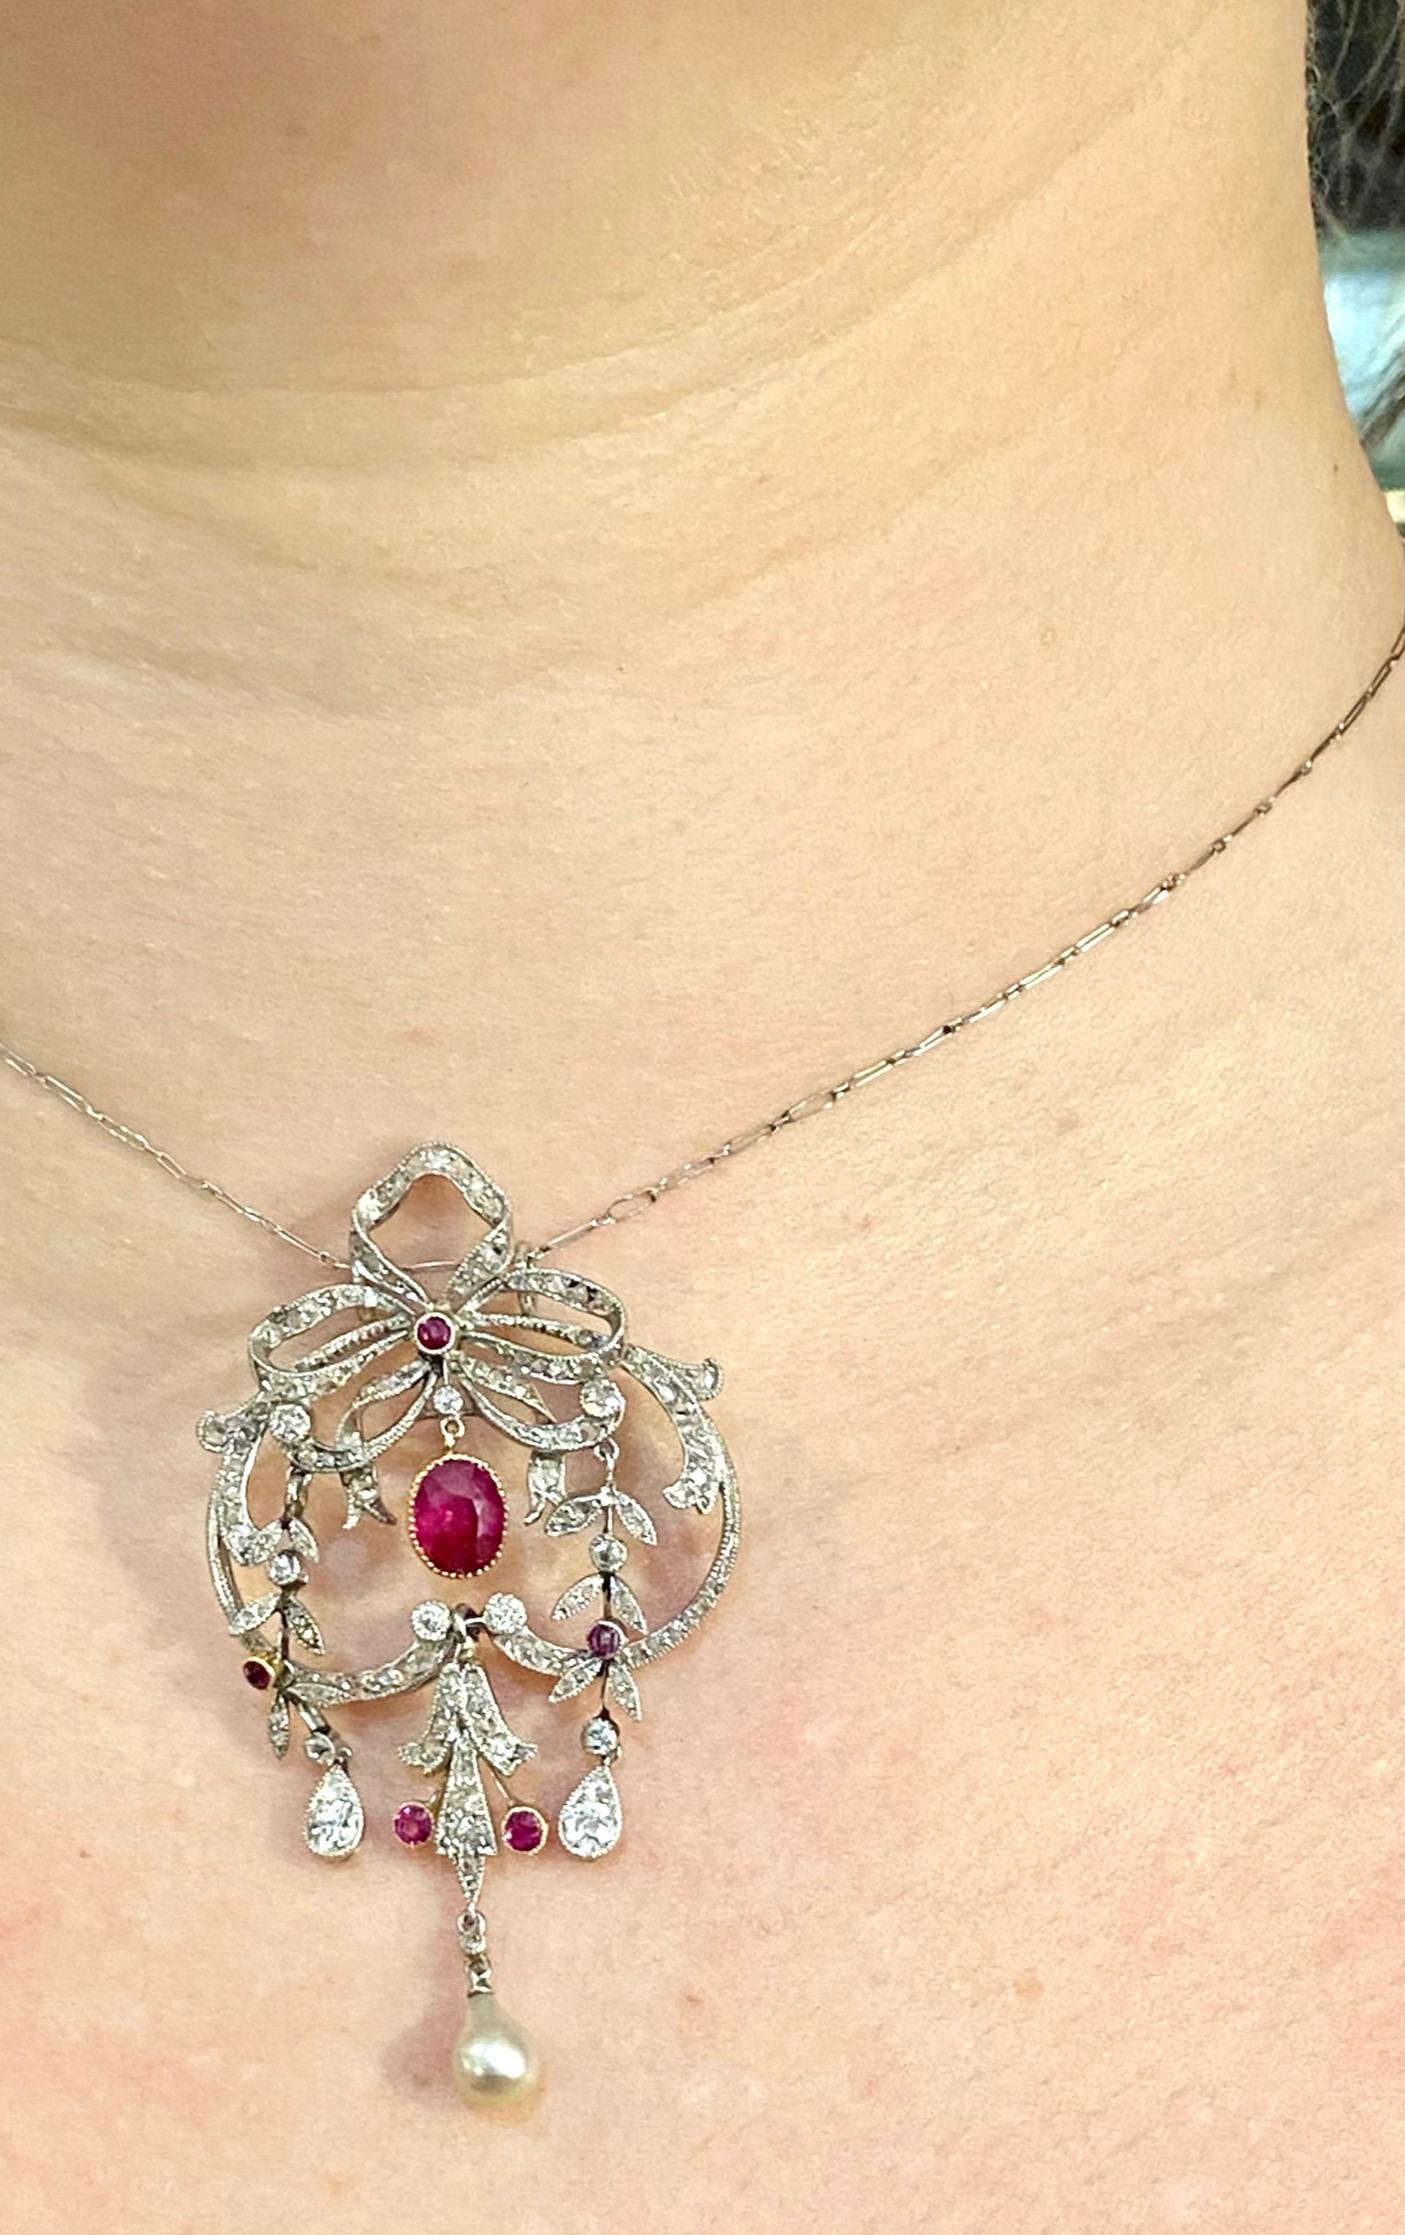 Edwardian Pendant with Chain / Brooch Platinum, Gold, Diamonds and Birma Ruby For Sale 5